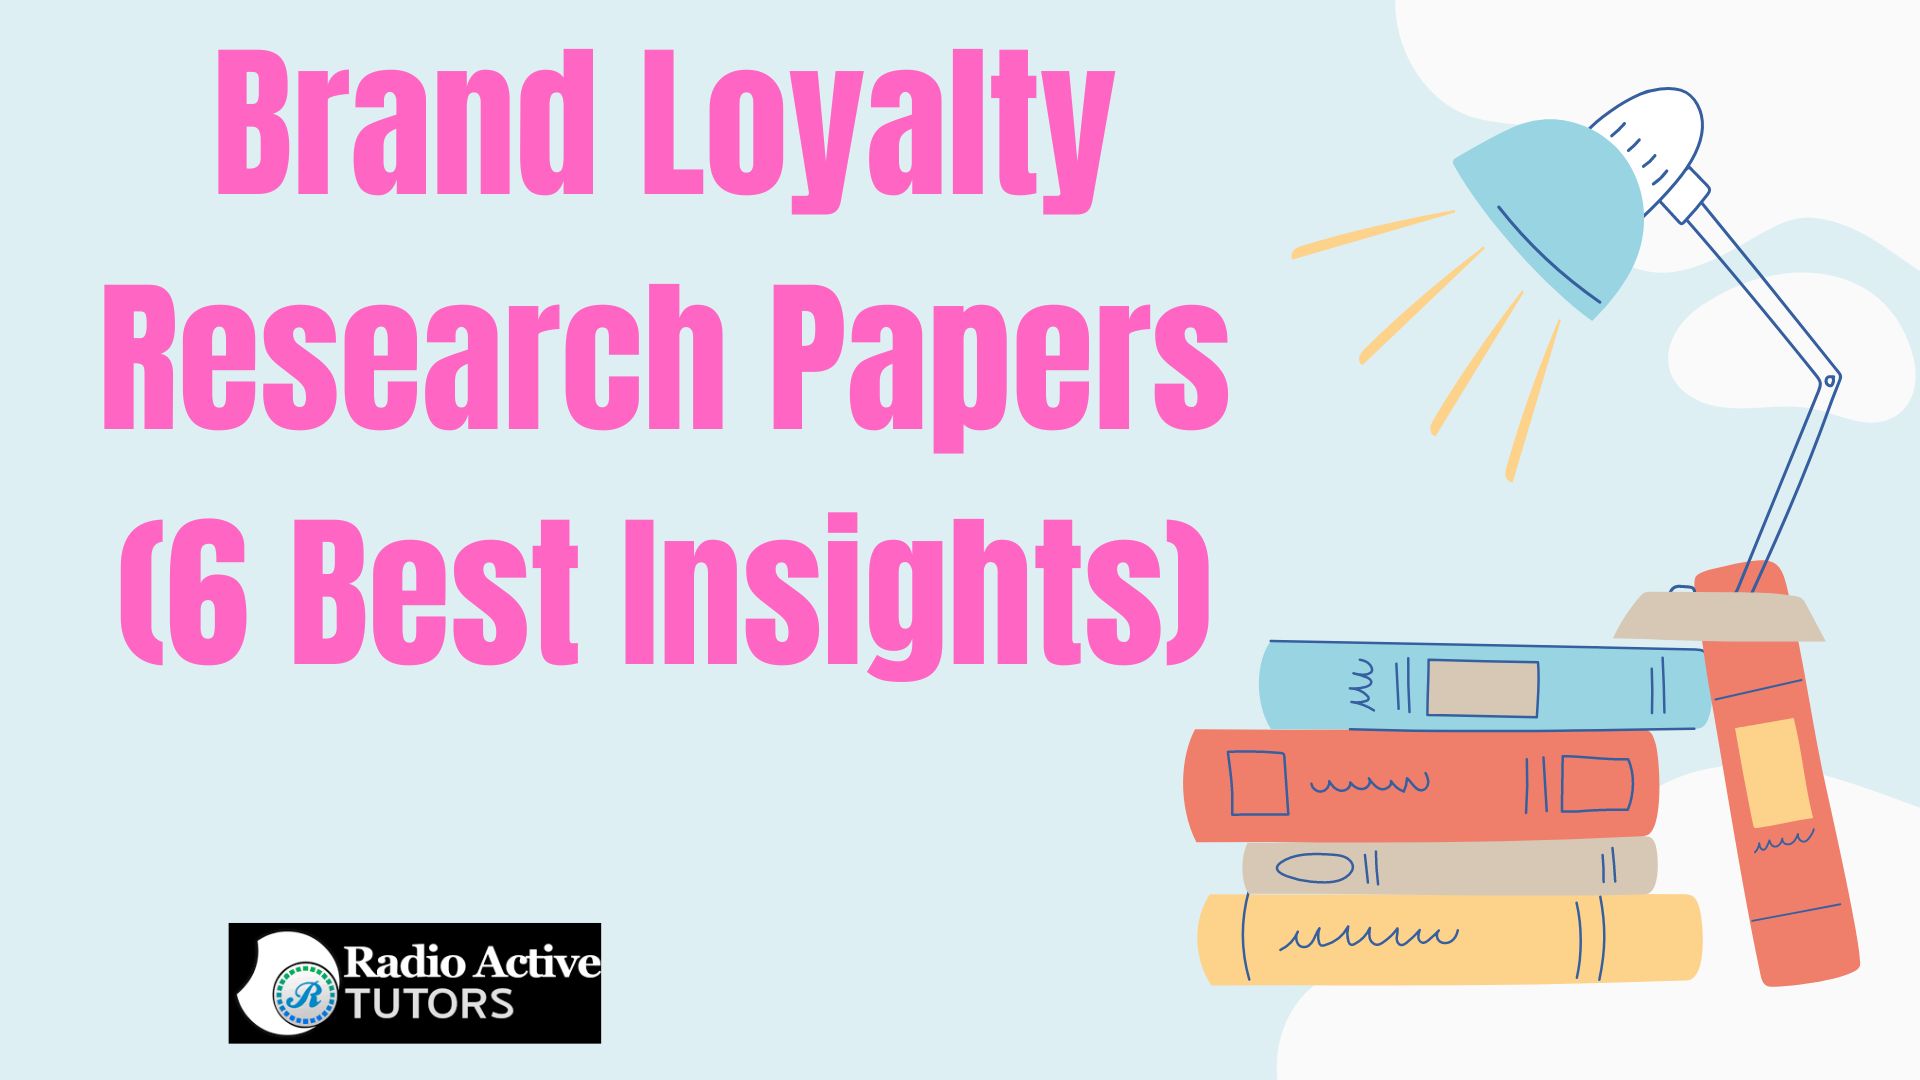 Brand Loyalty Research Papers (6 Best Insights)